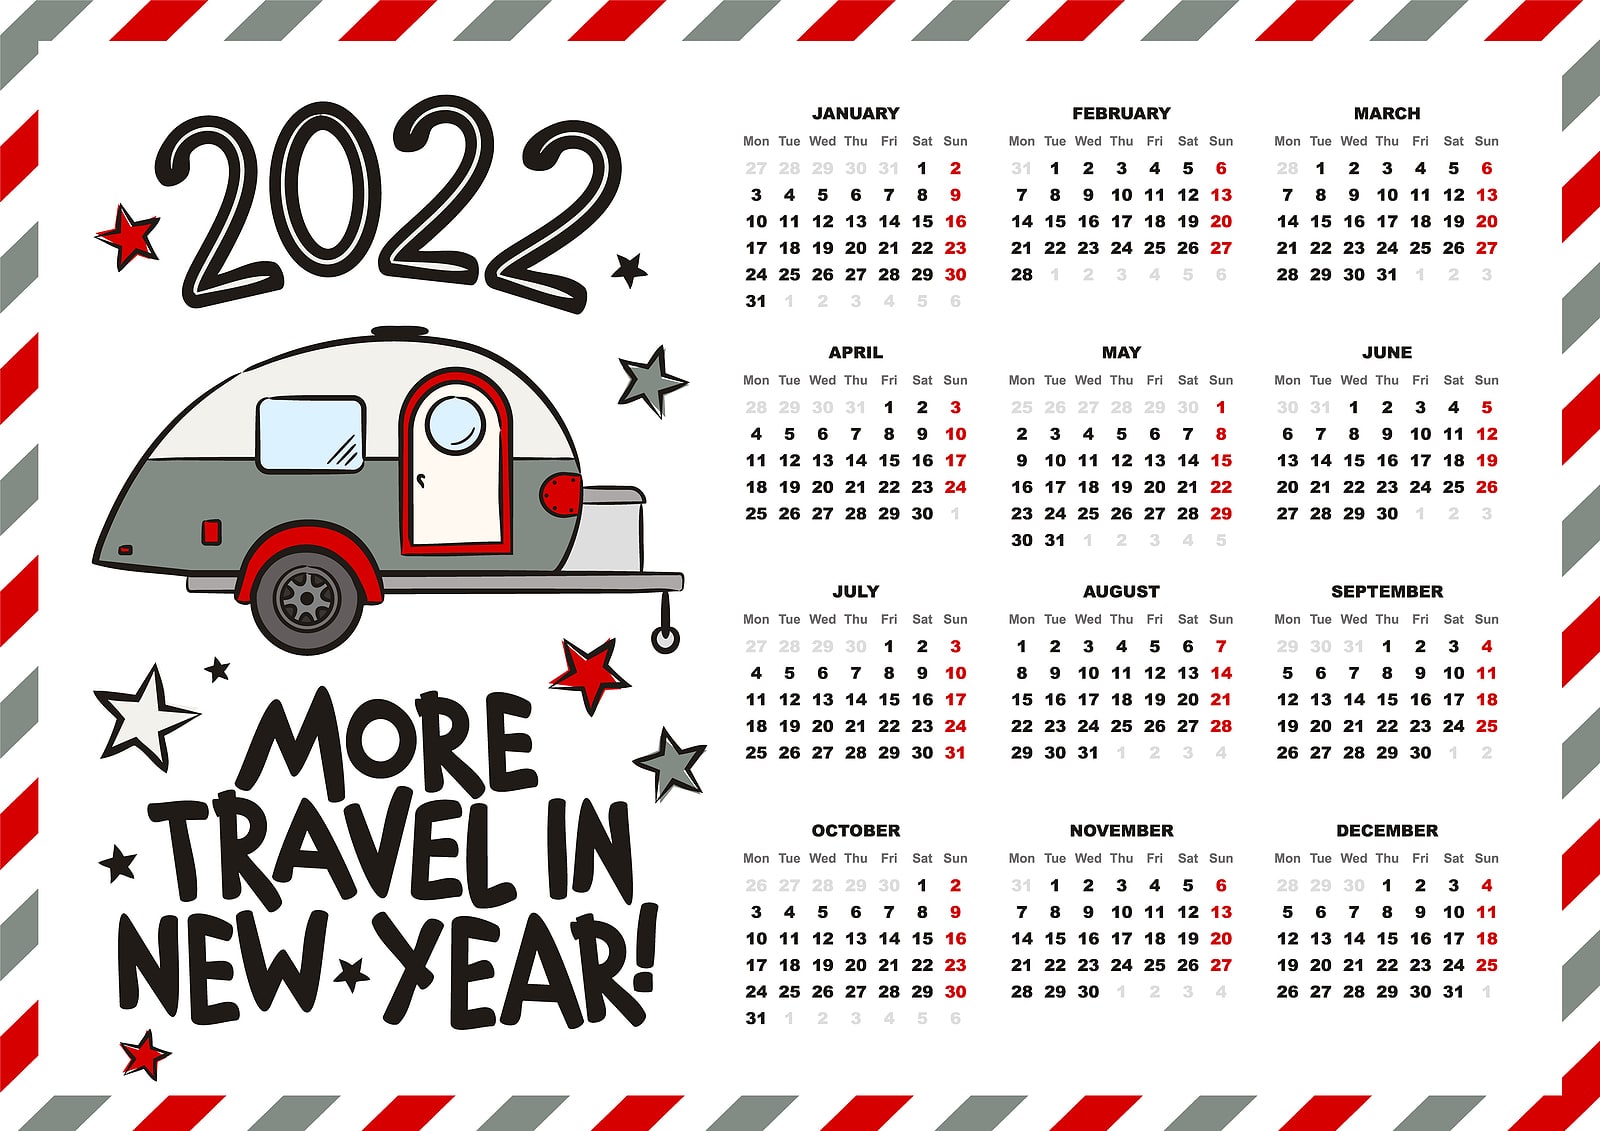 Why Your New Year's Resolution Includes More Travel